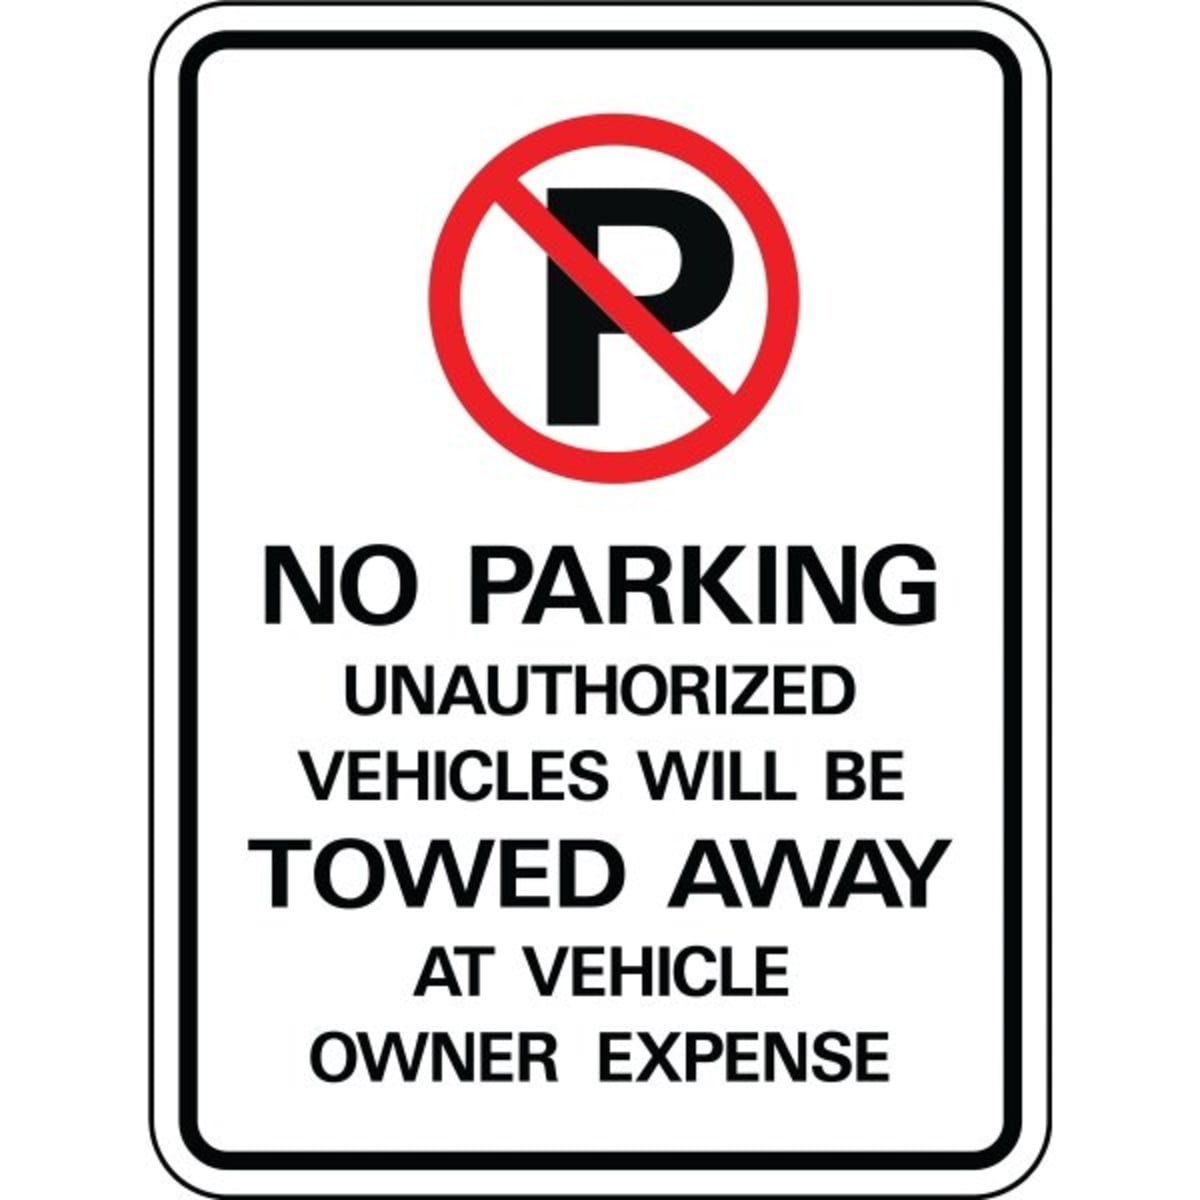 18 X 24 Heavy-Gauge Aluminum Rust Proof Parking Sign Protect Your Business & Municipality No Parking Tow Away Zone Made in The USA 